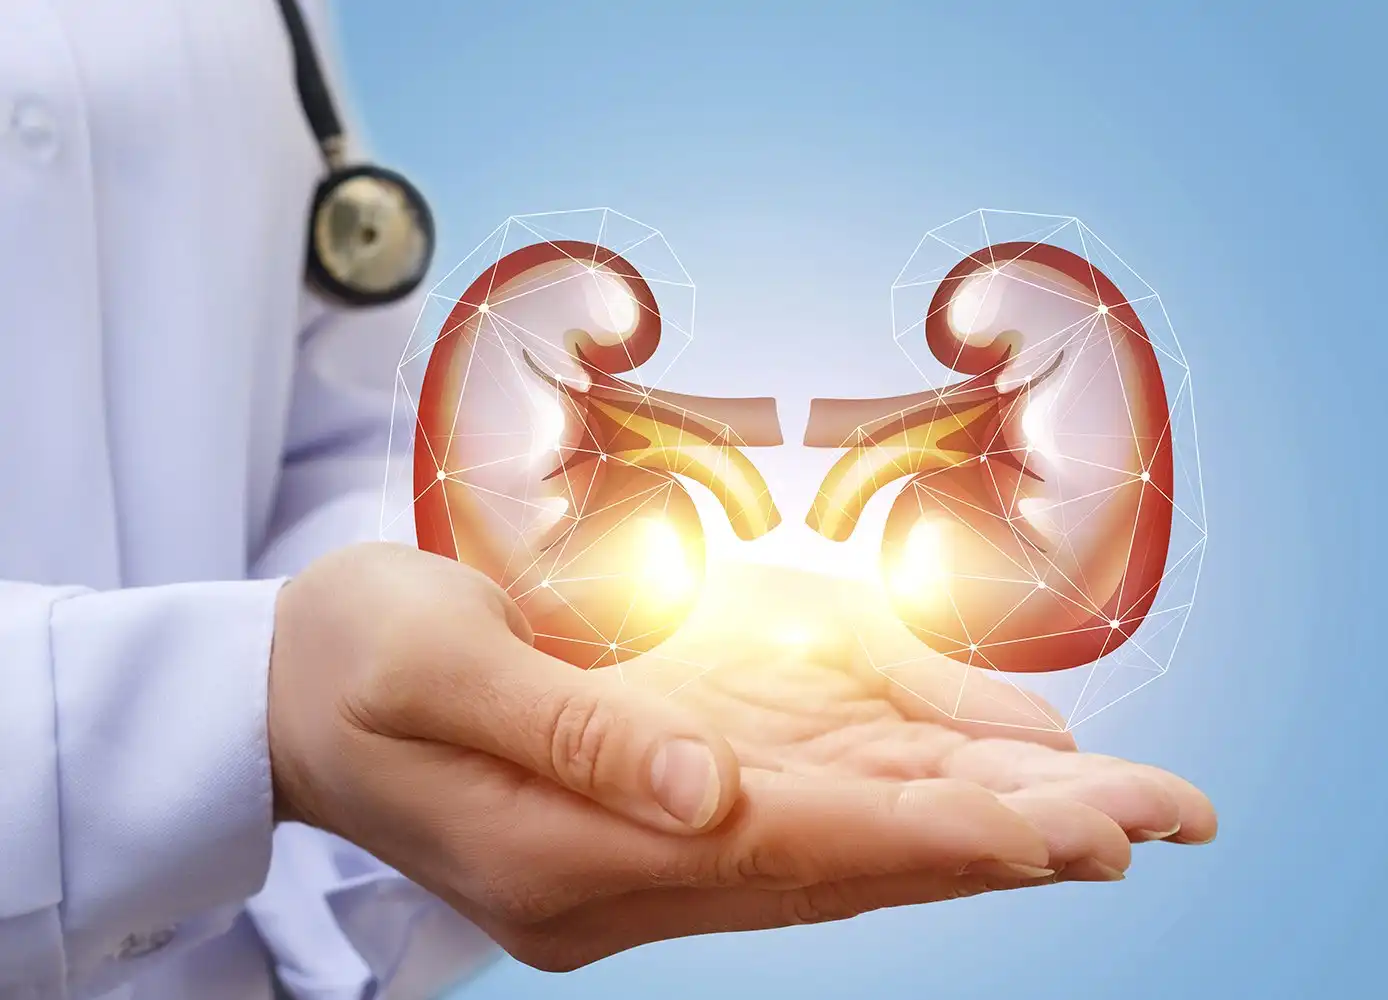 Take Better Care of Your Kidneys